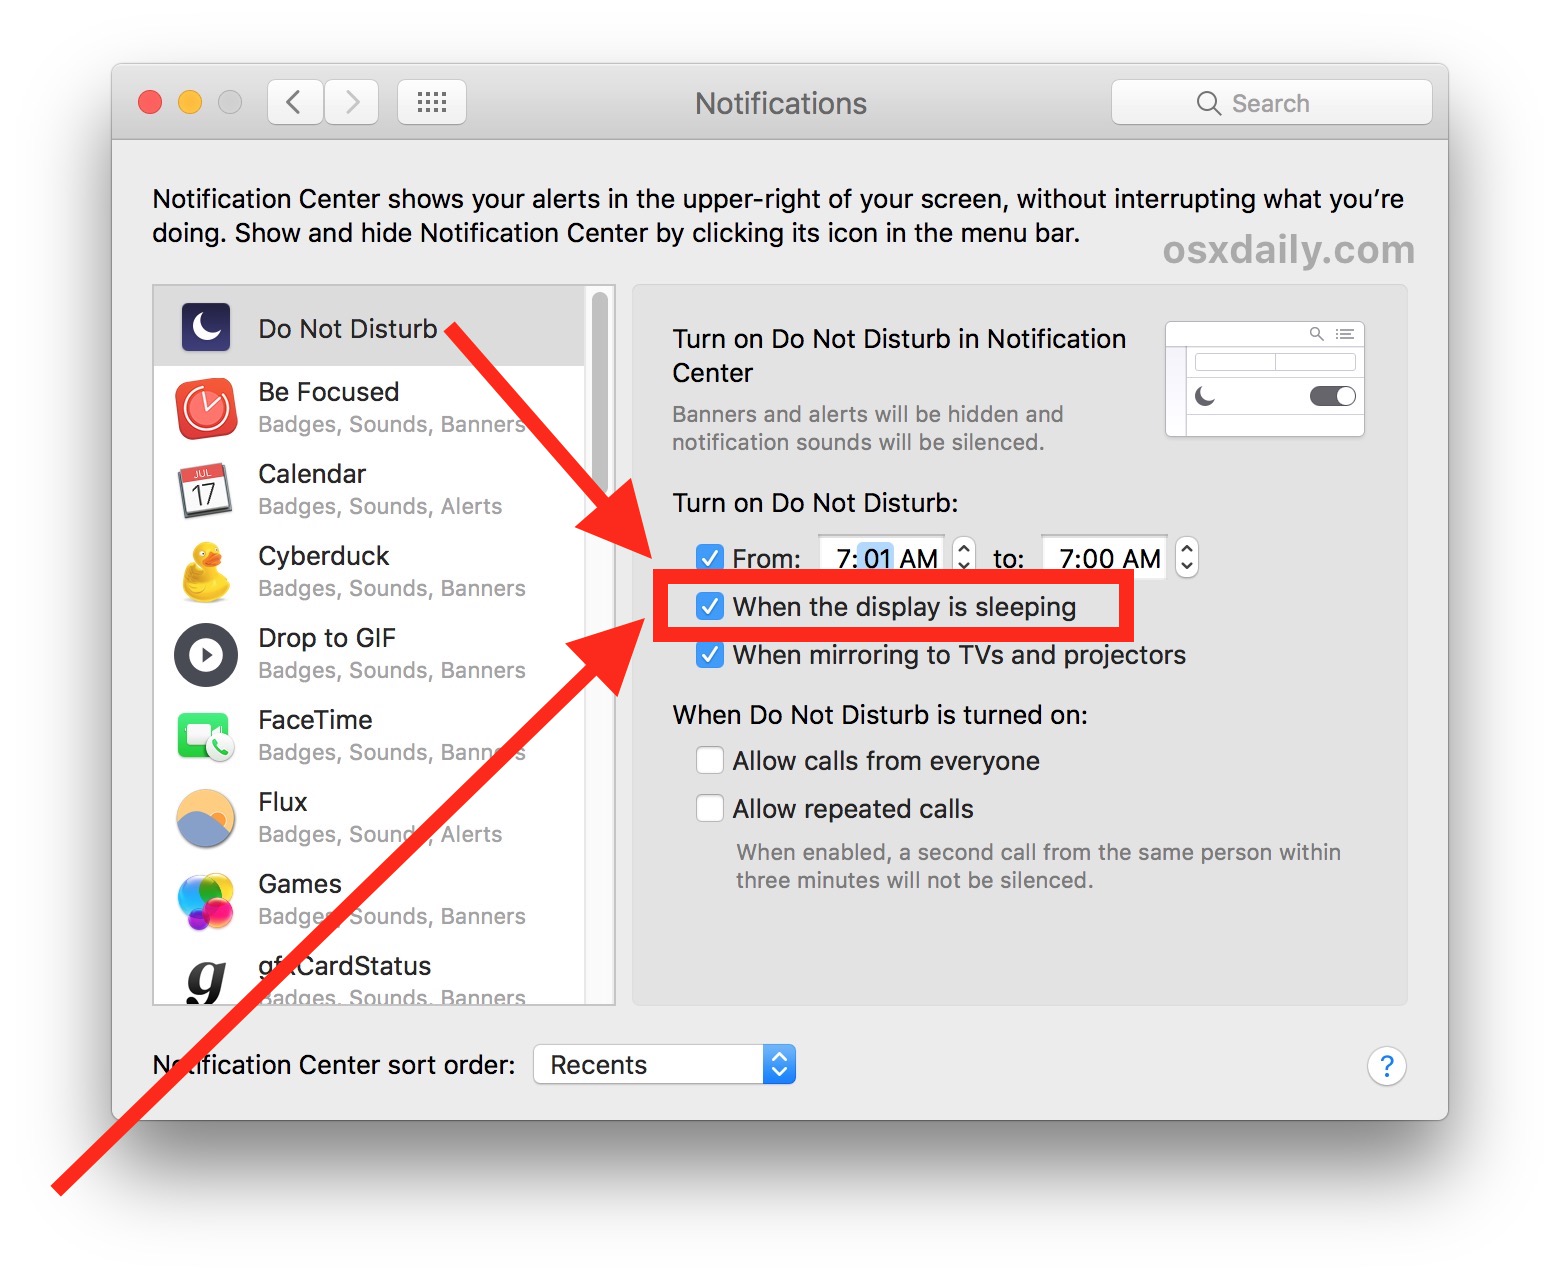 Disable Enhanced Notifications to stop Notifications waking Mac from sleep